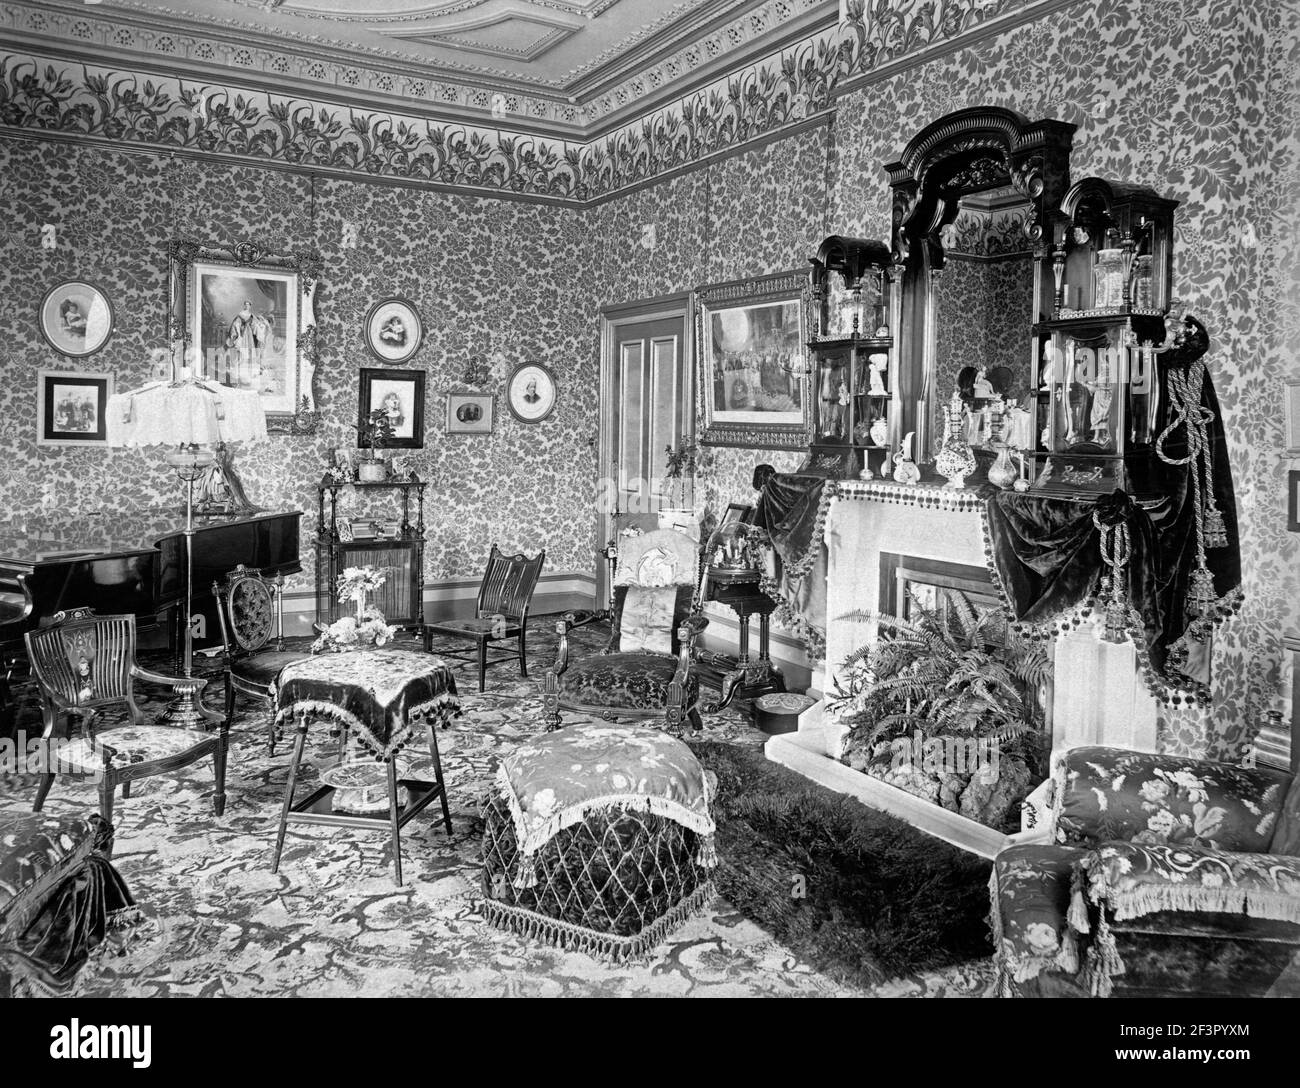 masterpiece reform Coalescence Victorian house interior Black and White Stock Photos & Images - Alamy